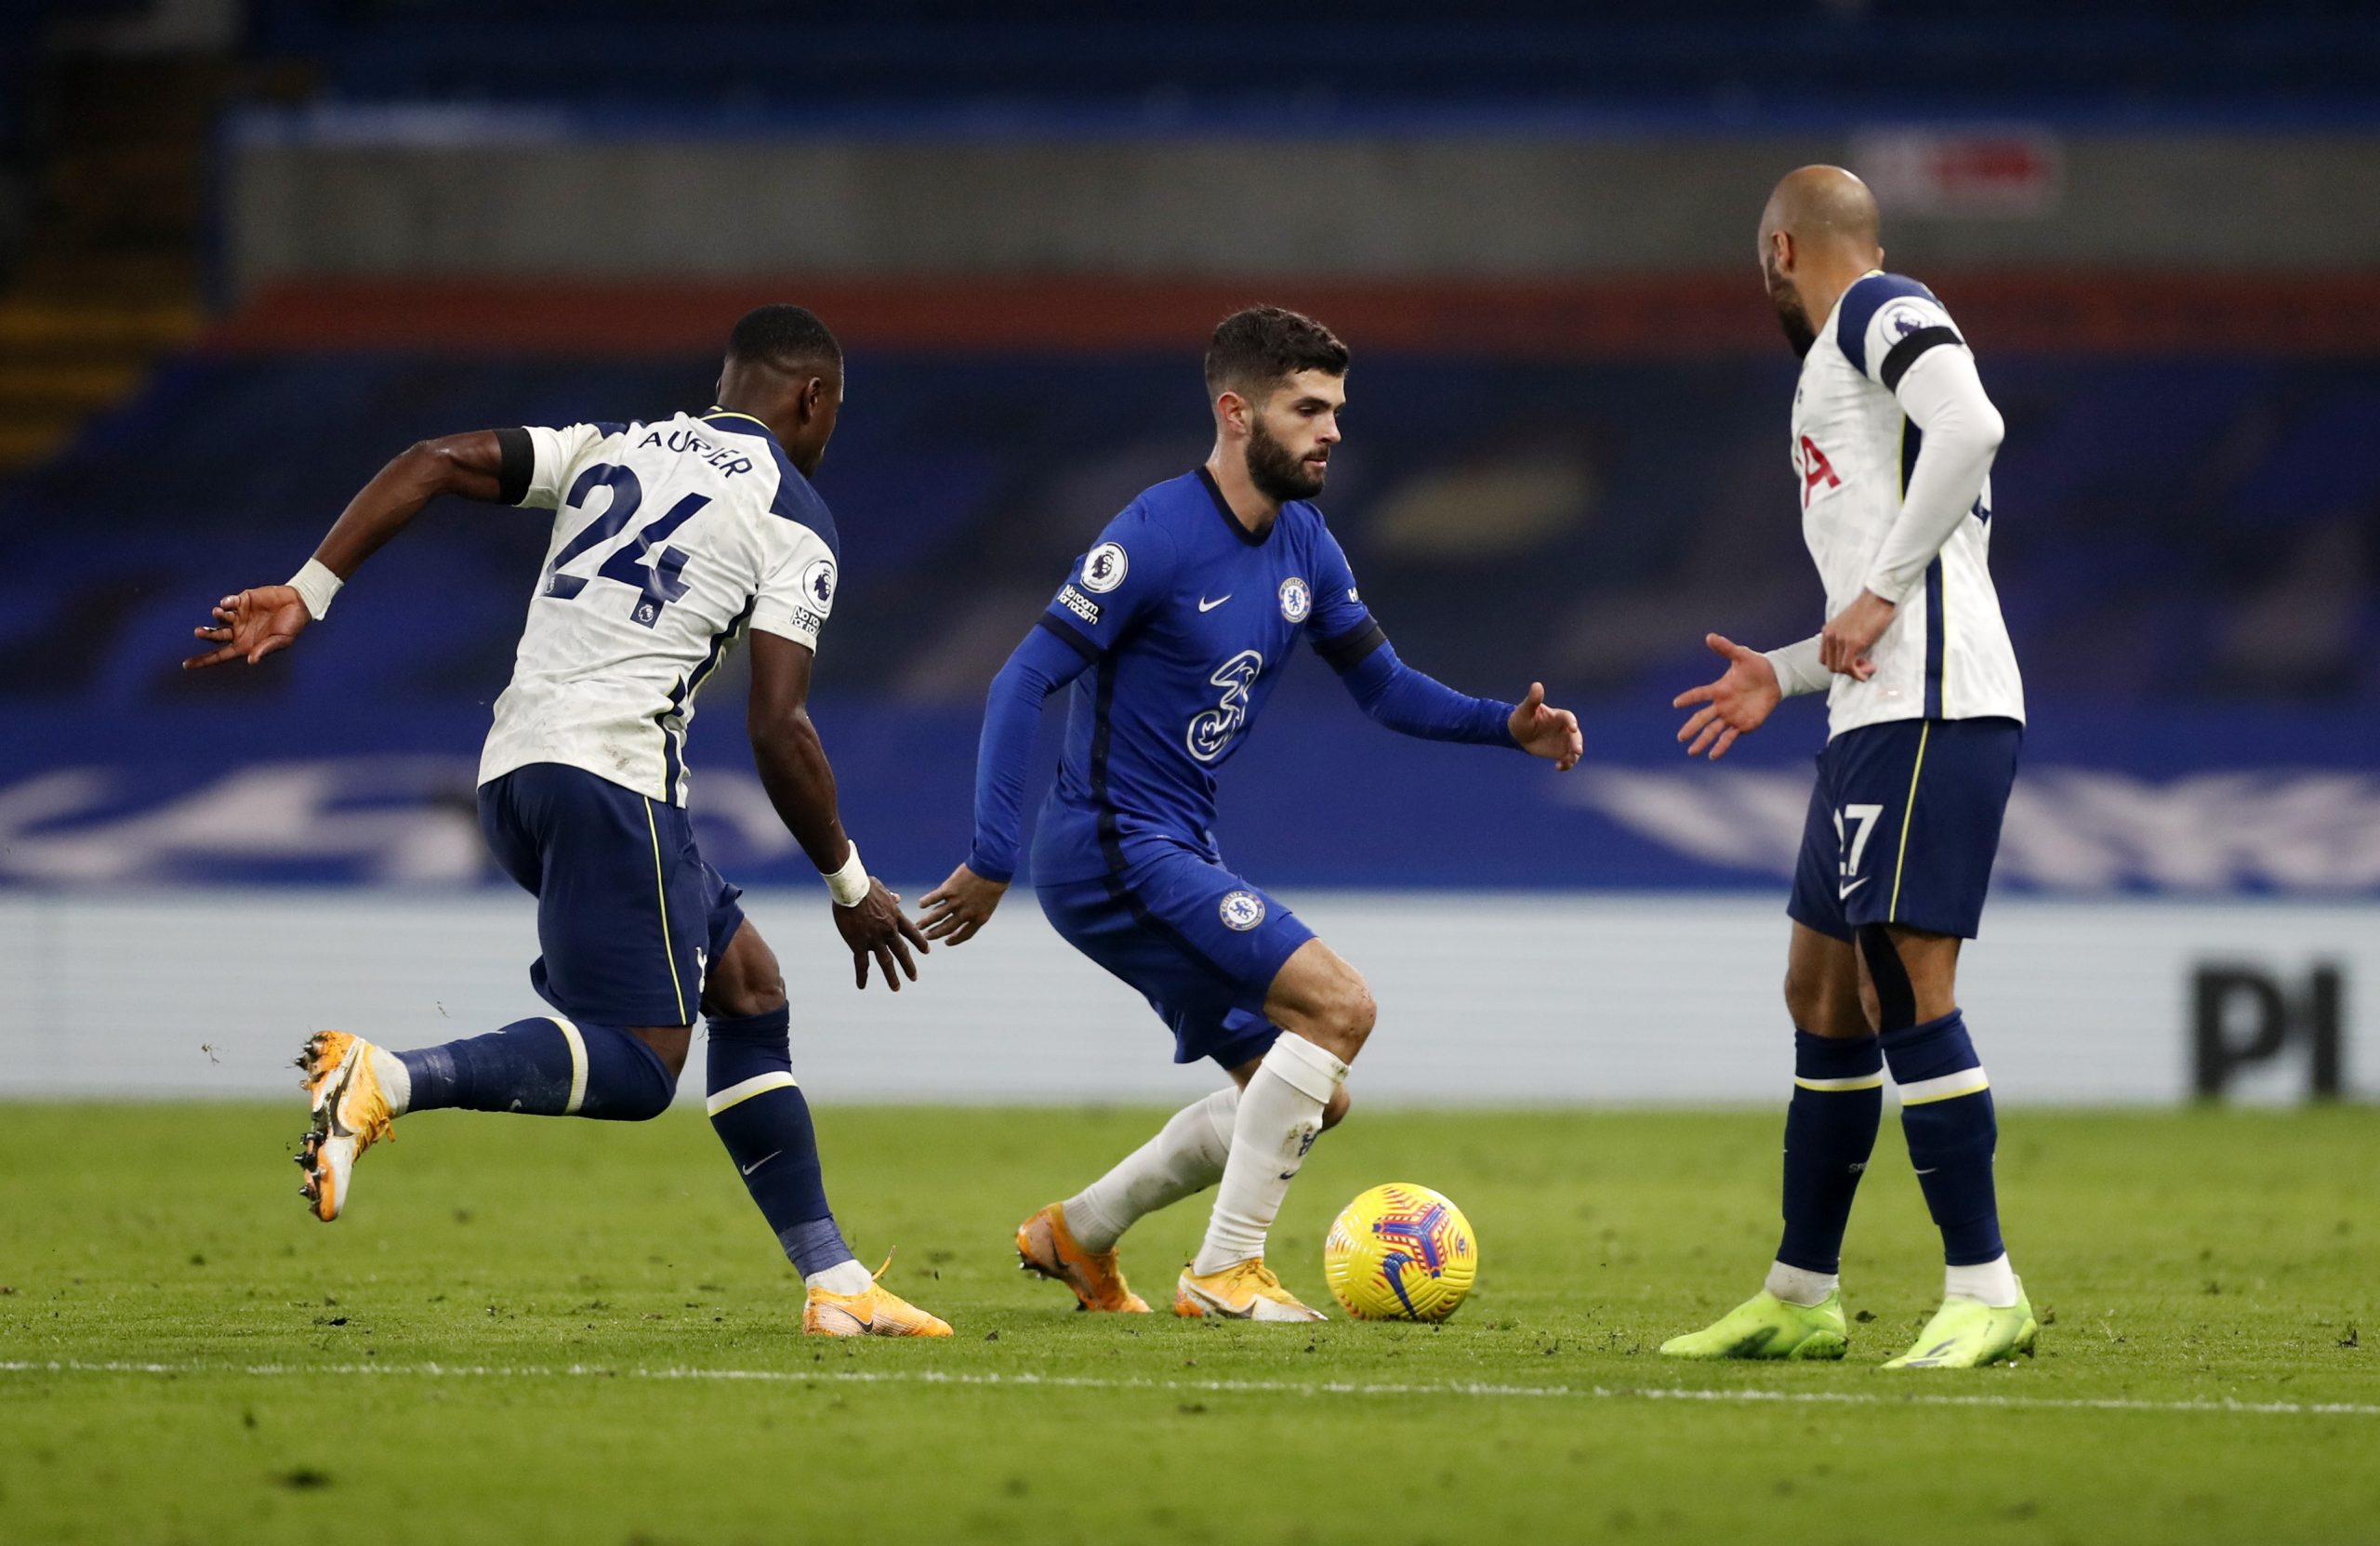 Christian Pulisic of Chelsea is closed down by Serge Aurier and Lucas Moura of Tottenham Hotspur.